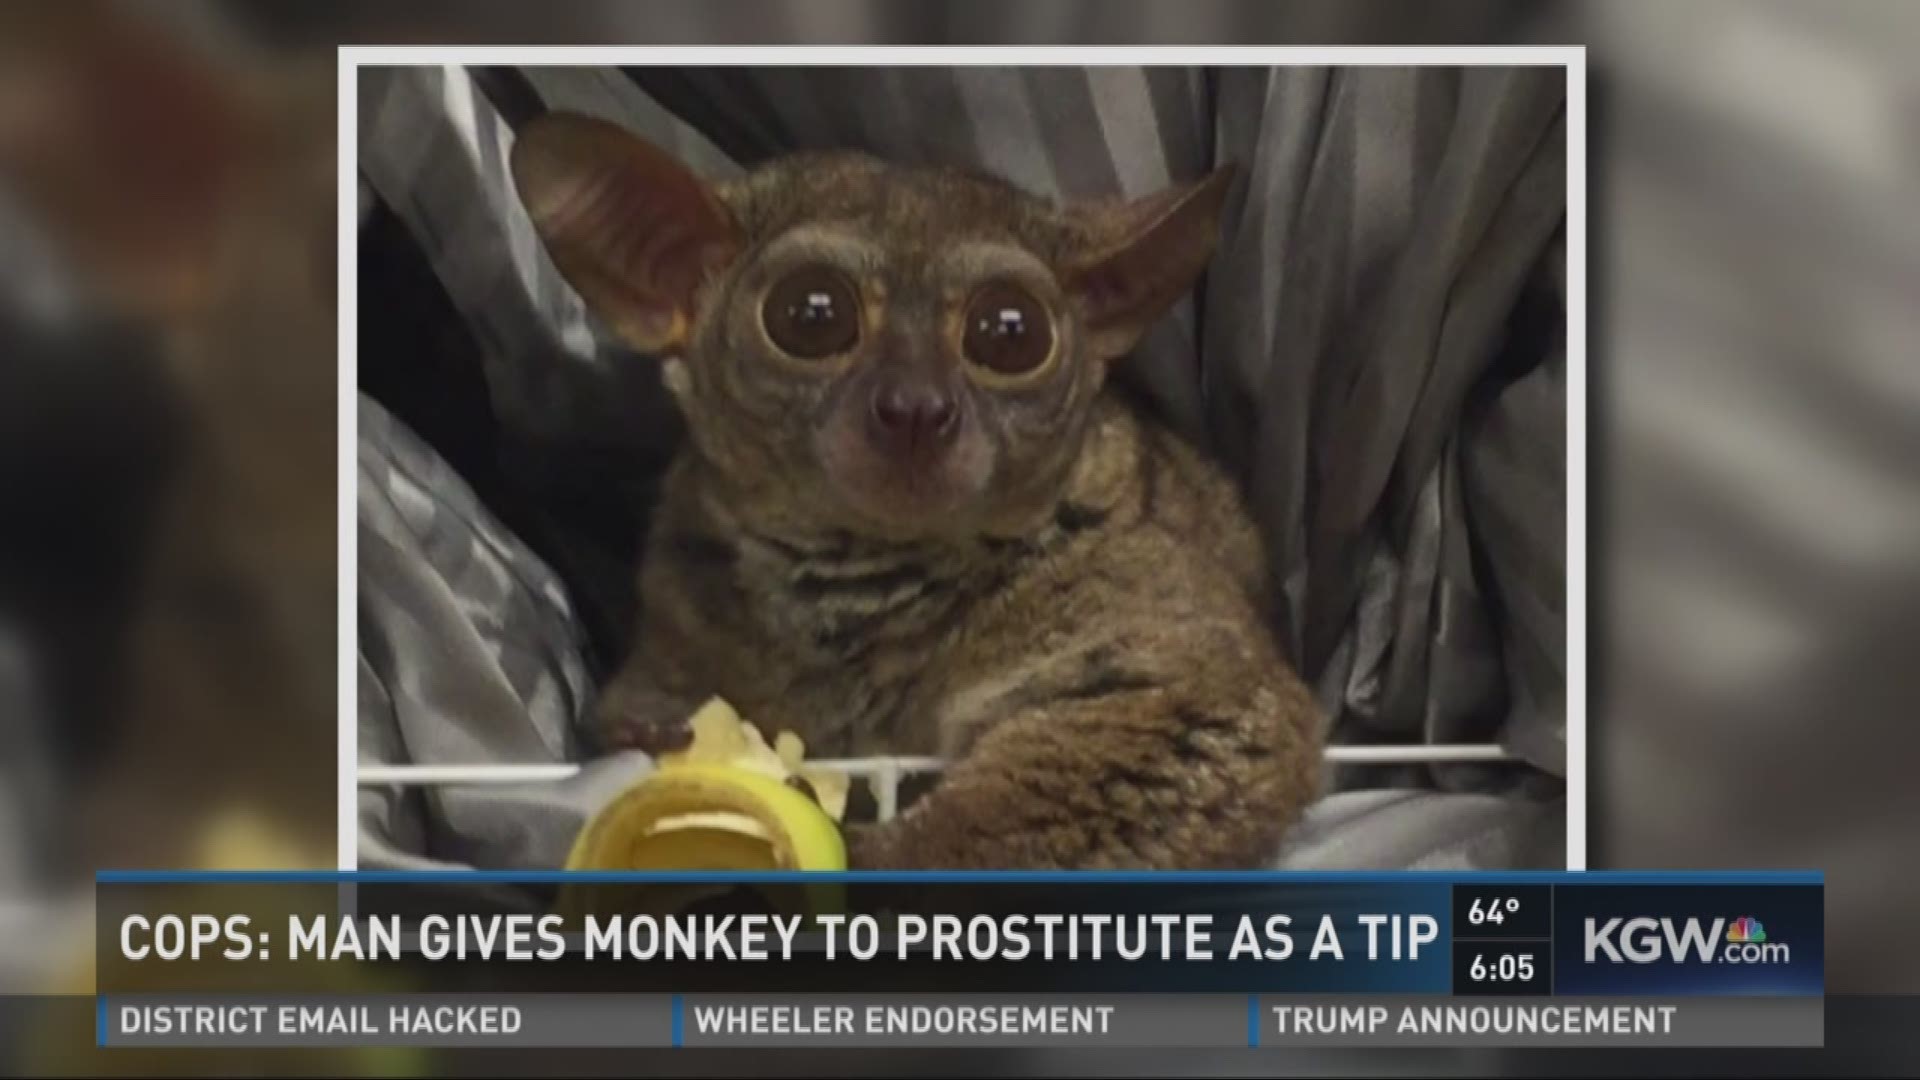 Primate used as tip for prostitute